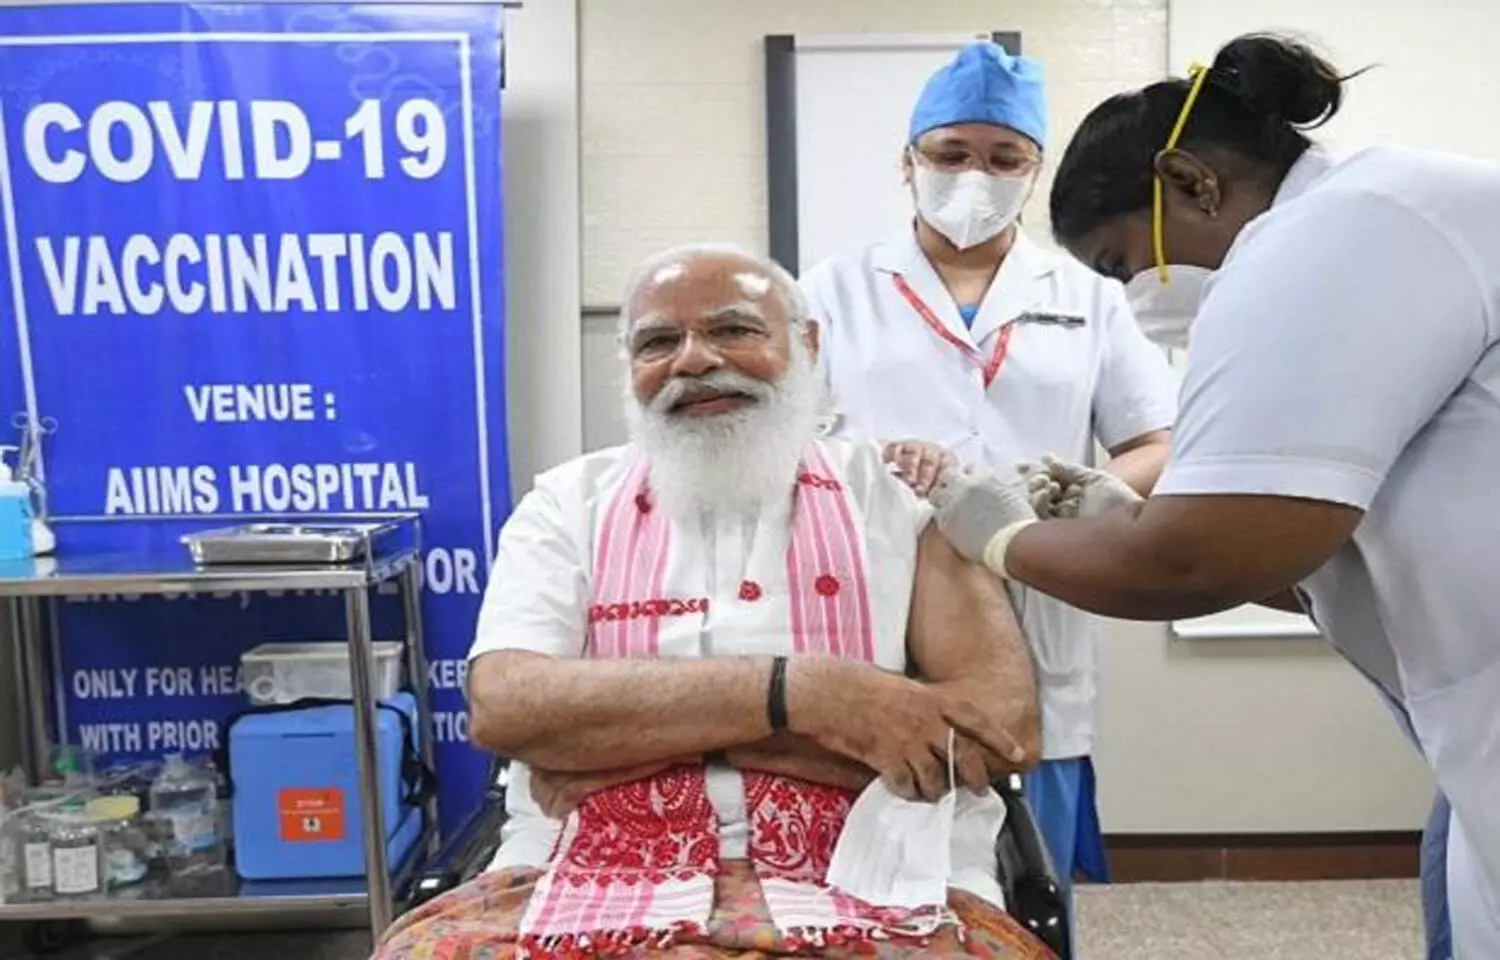 PM Modi sets example, takes first dose of Covaxin at AIIMS